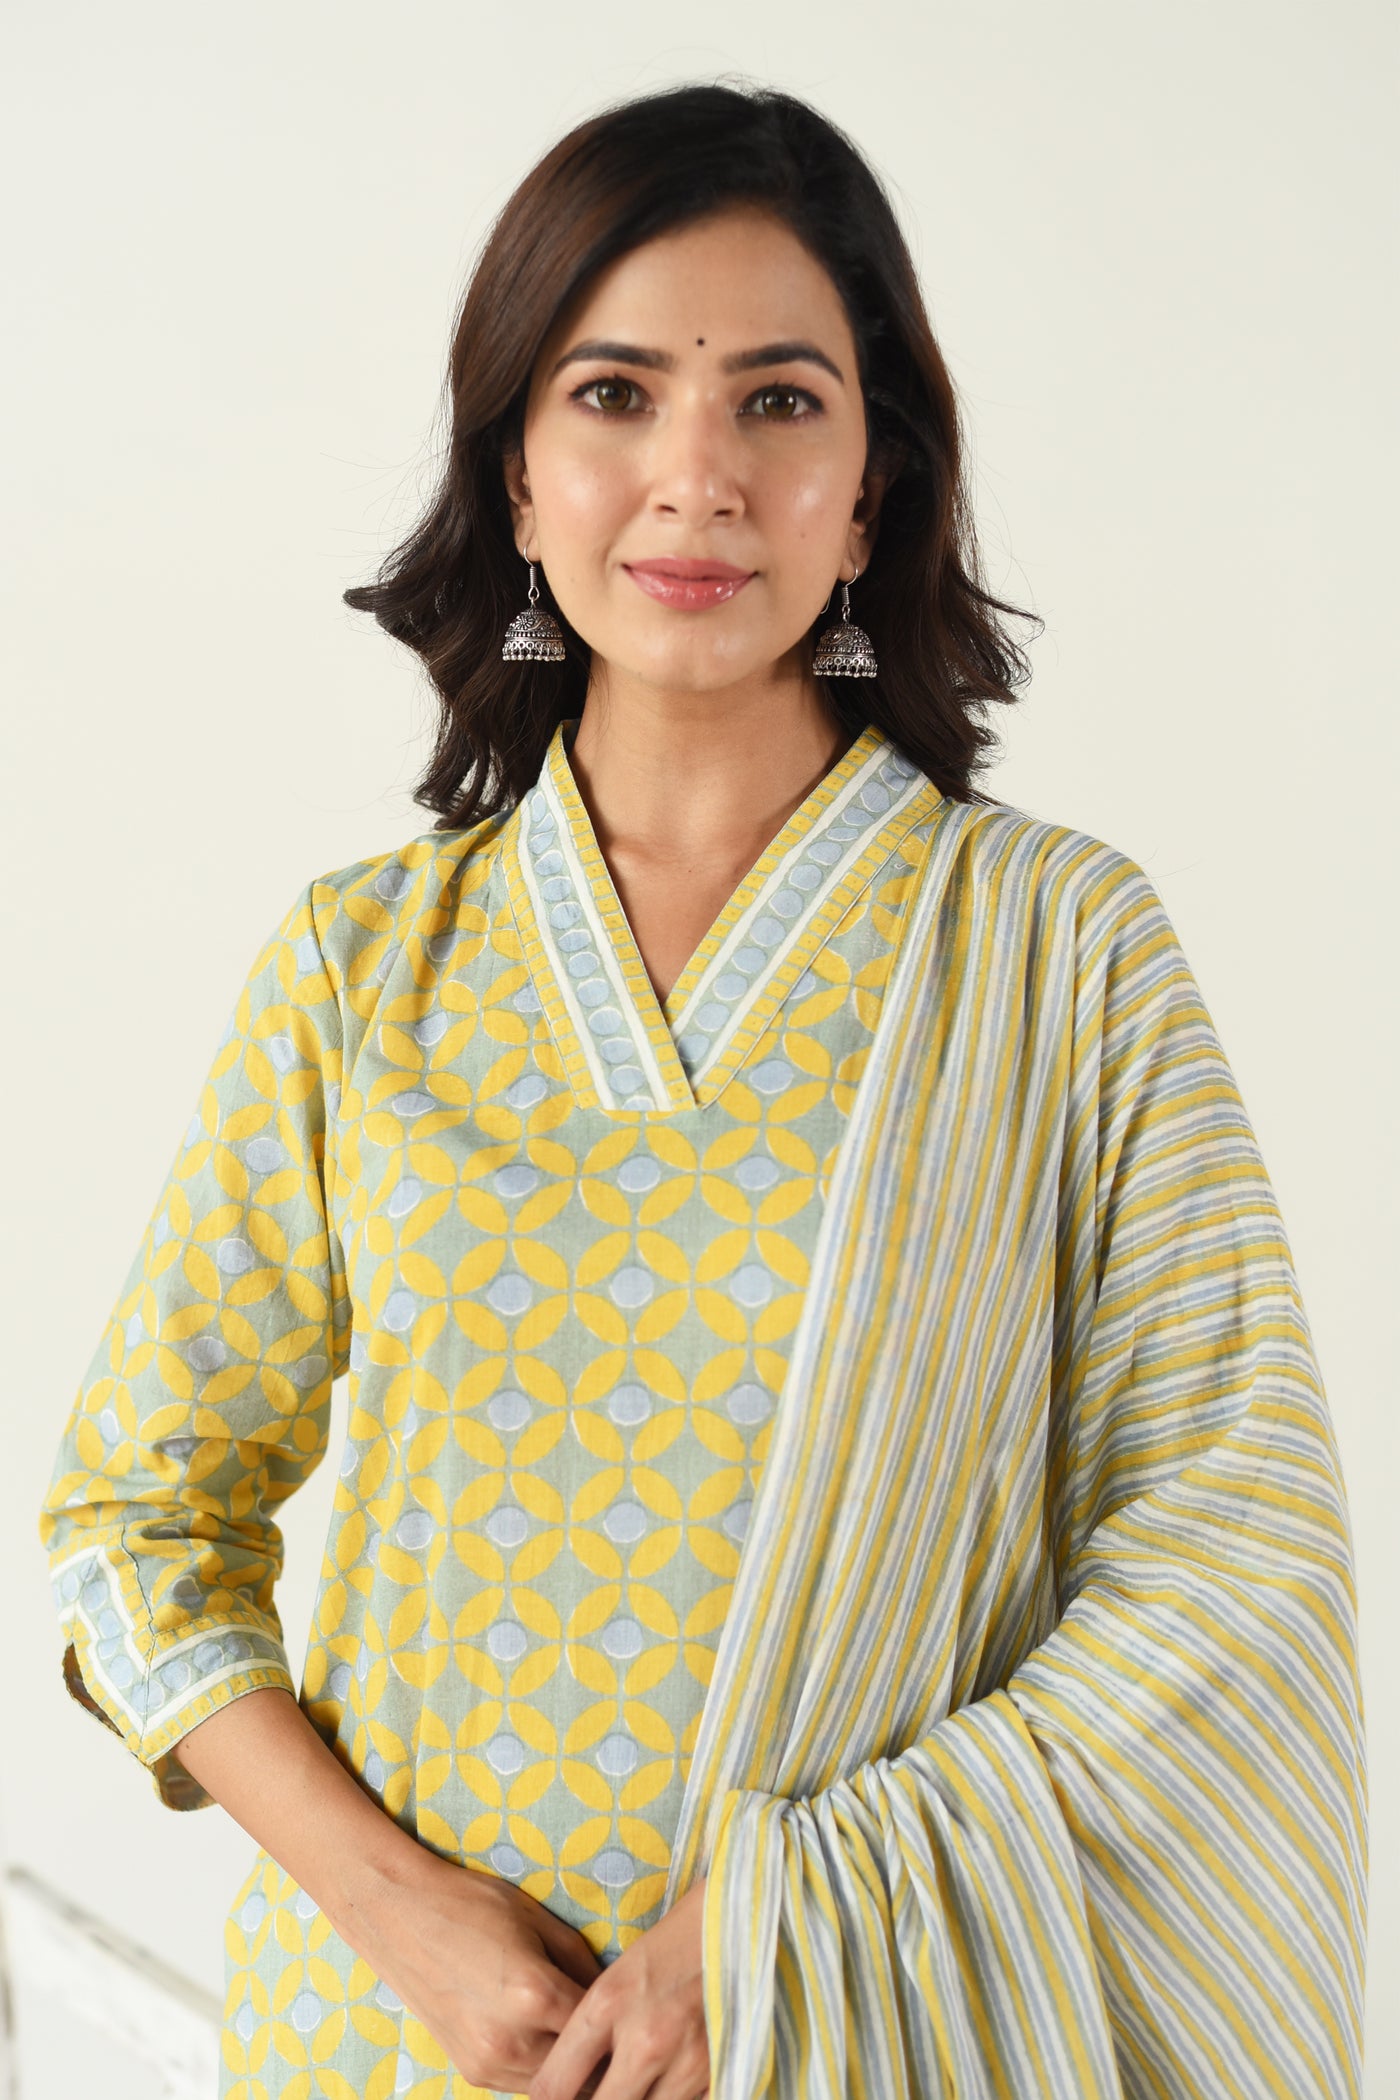 Cotton Geometric Print Suit Set In Shades Of Light Yellow And Grey